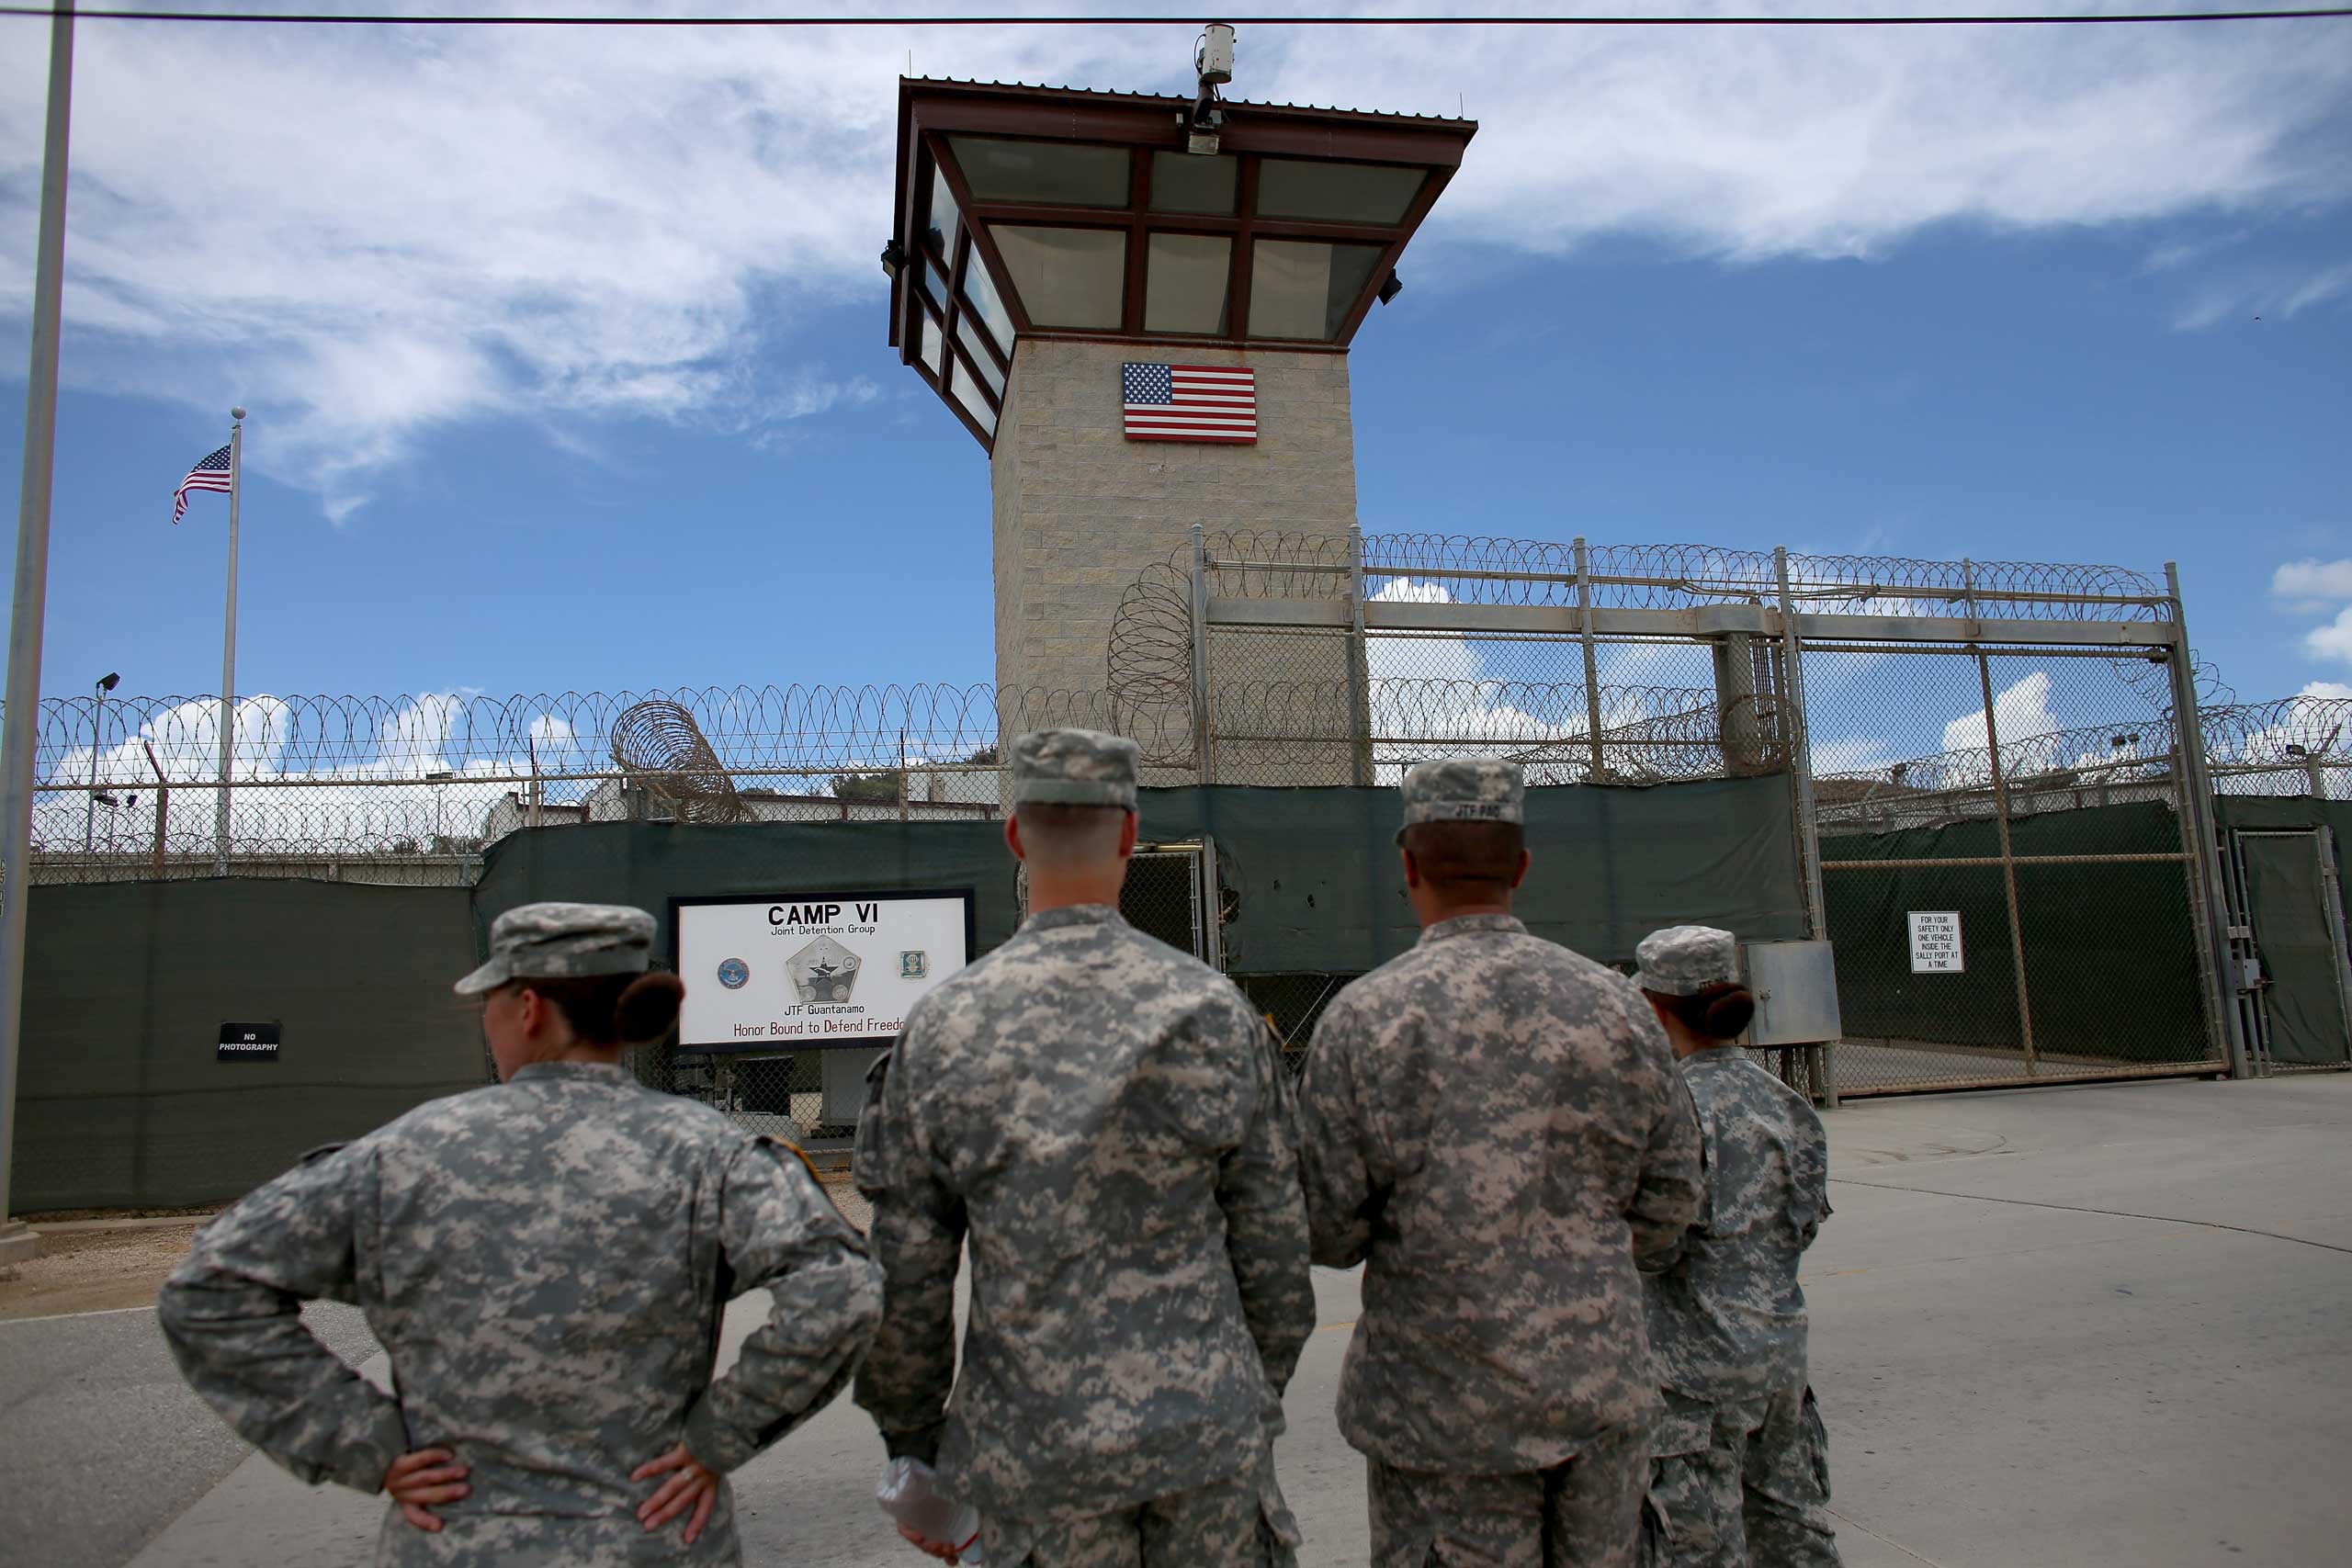 Military officers stand at the entrance to Camp VI and V at the U.S. military prison for 'enemy combatants' on June 25, 2013 in Guantanamo Bay, Cuba. (Joe Raedle—Getty Images)